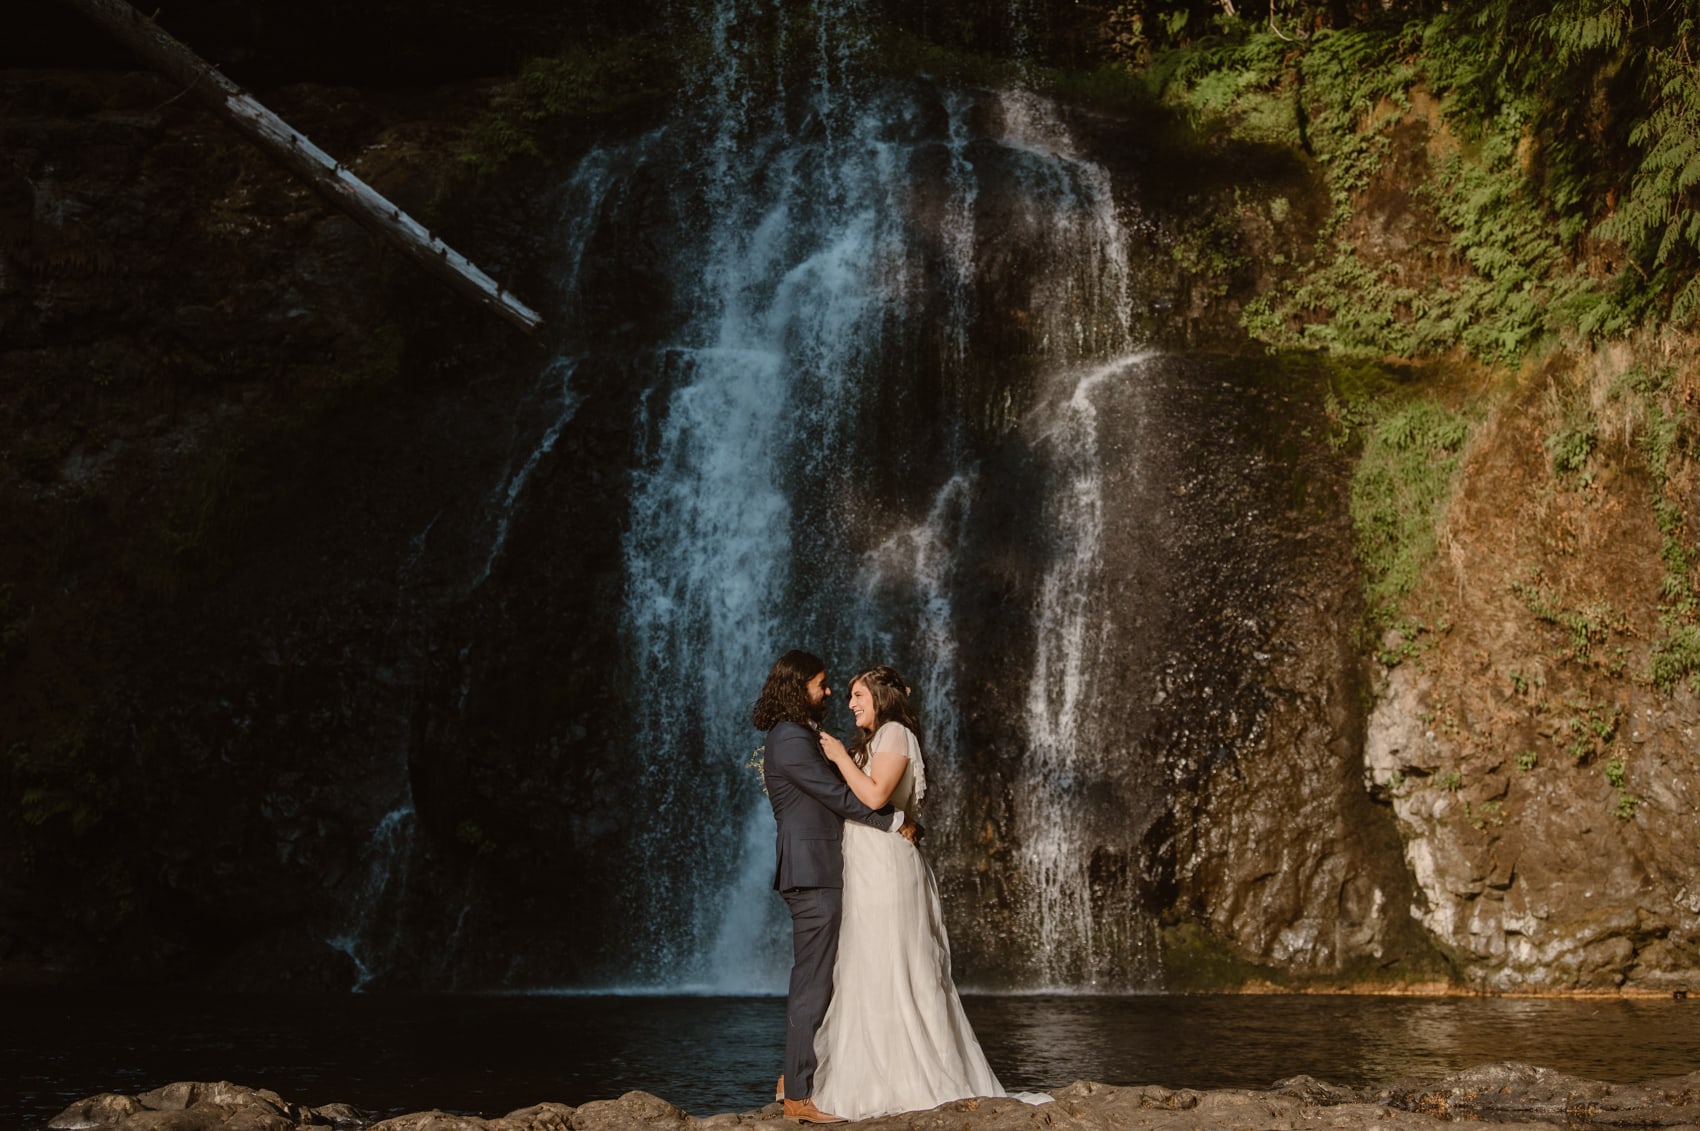 Silver Falls State Park Elopement and Micro Wedding Guide